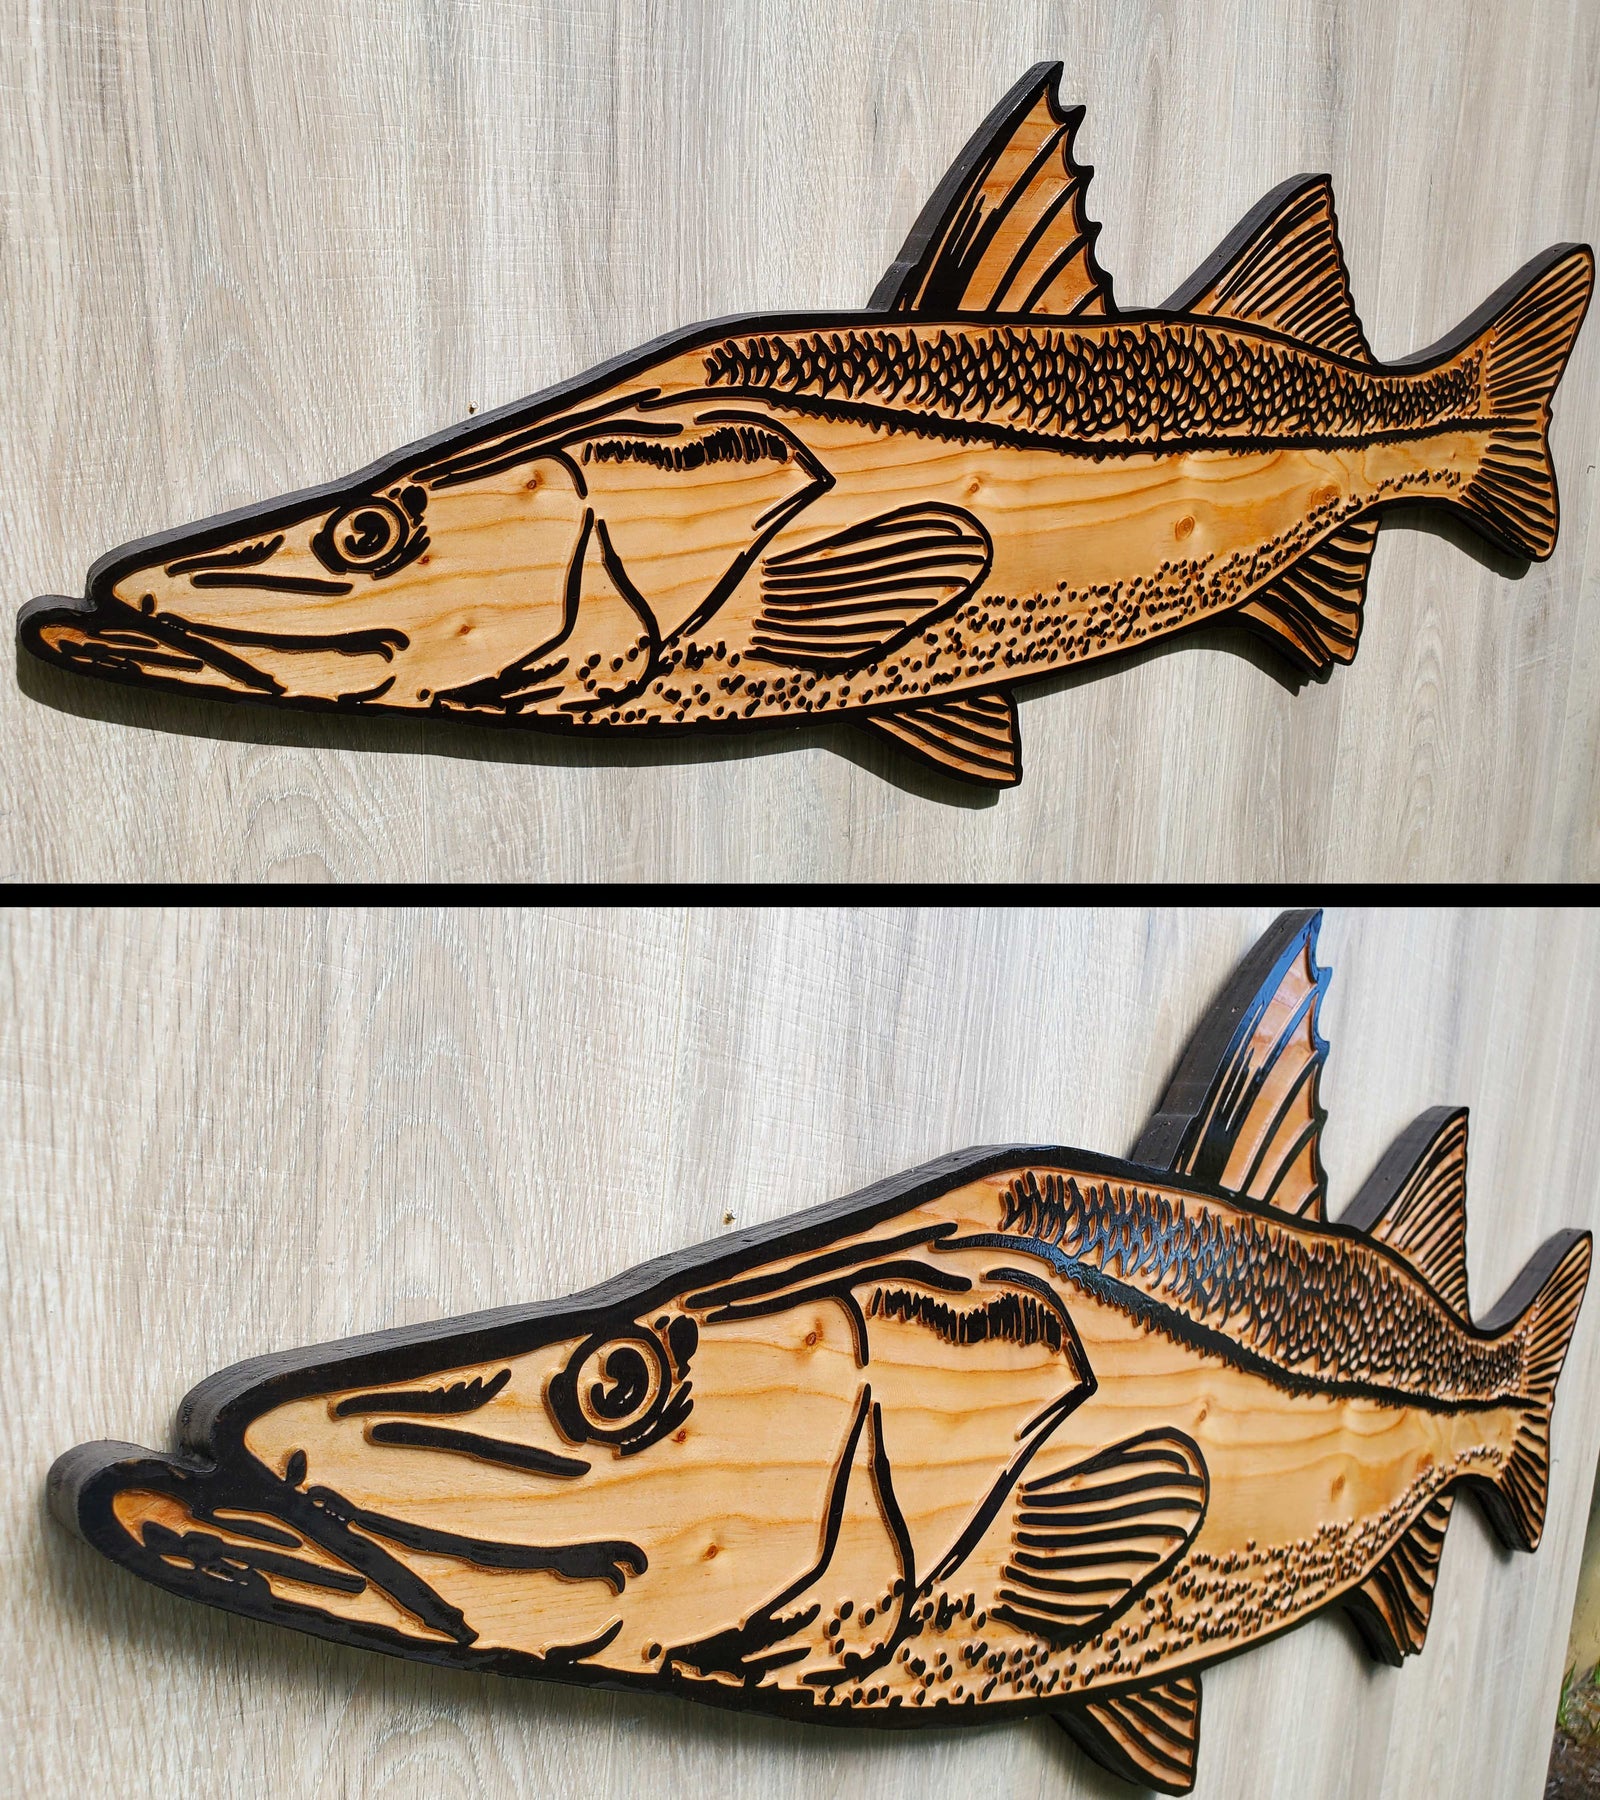 Snook Wood Carving Wall Hanging Art Work. Carved Wooden Snook Fish. –  Island Vibes Inc.